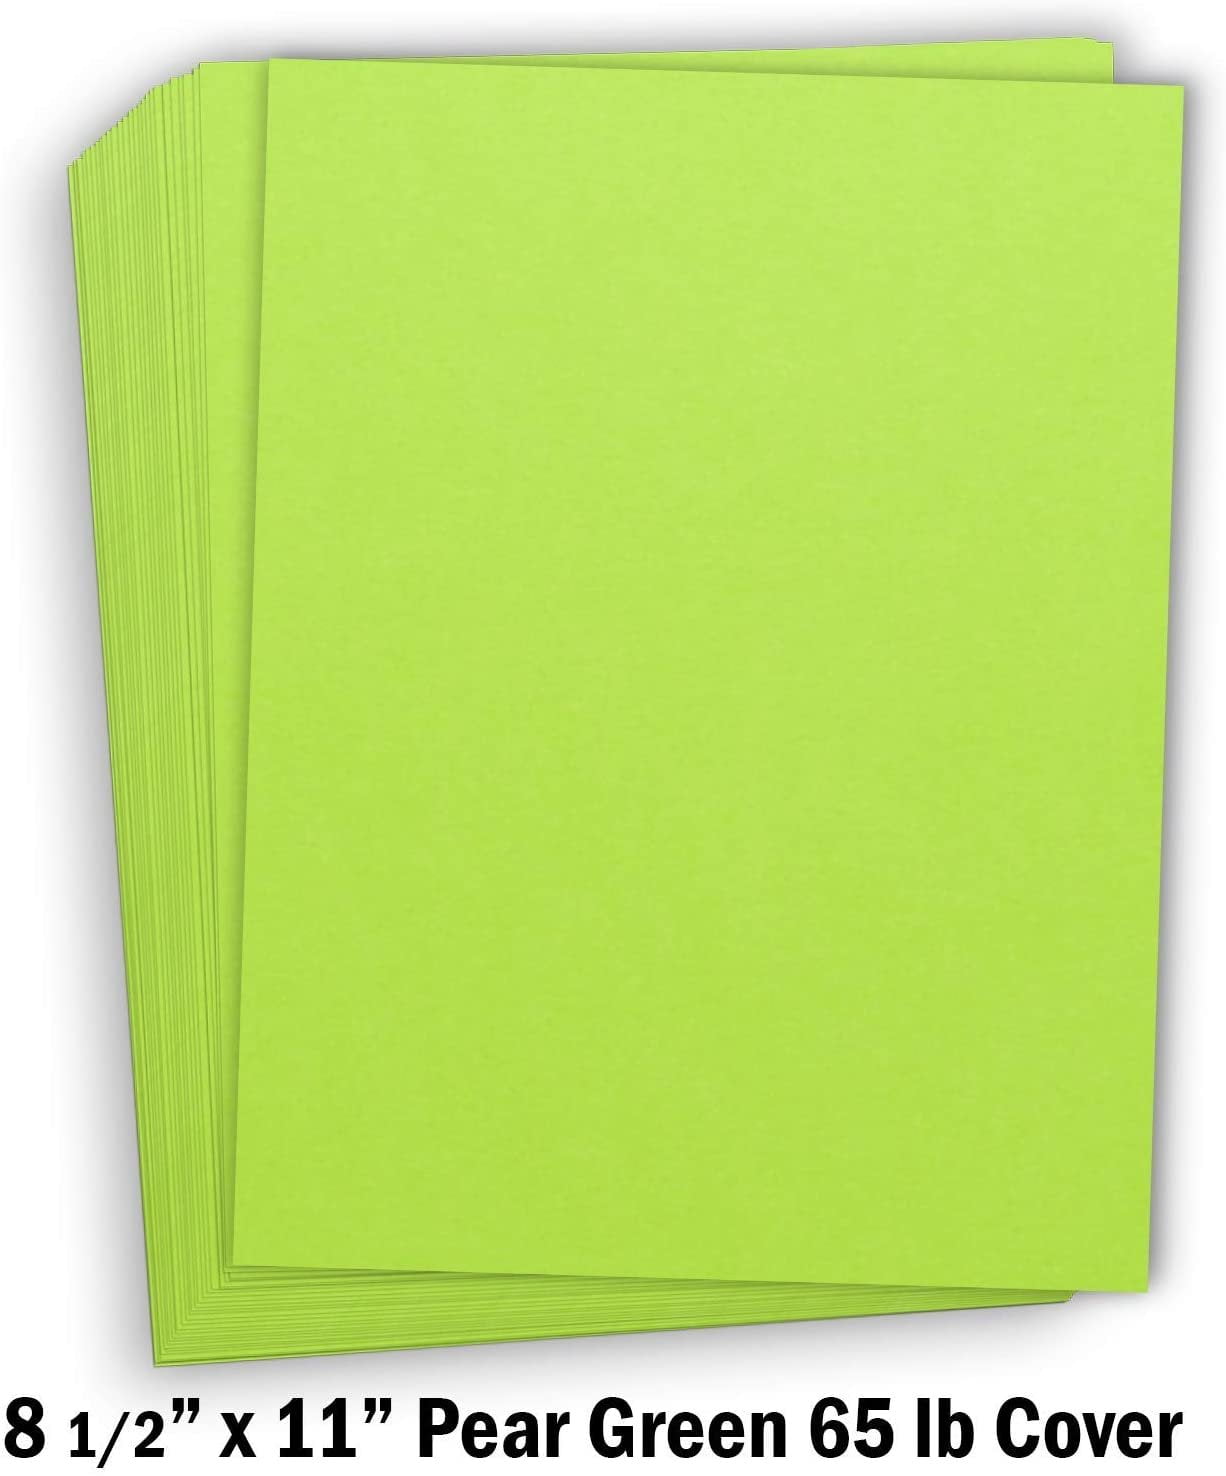 15Sheets Green Cardstock Paper, 12x12 Card stock for Cricut, Thick  Construction Paper for Card Making, Scrapbooking, Craft 90 lb / 250 gsm  (Green)